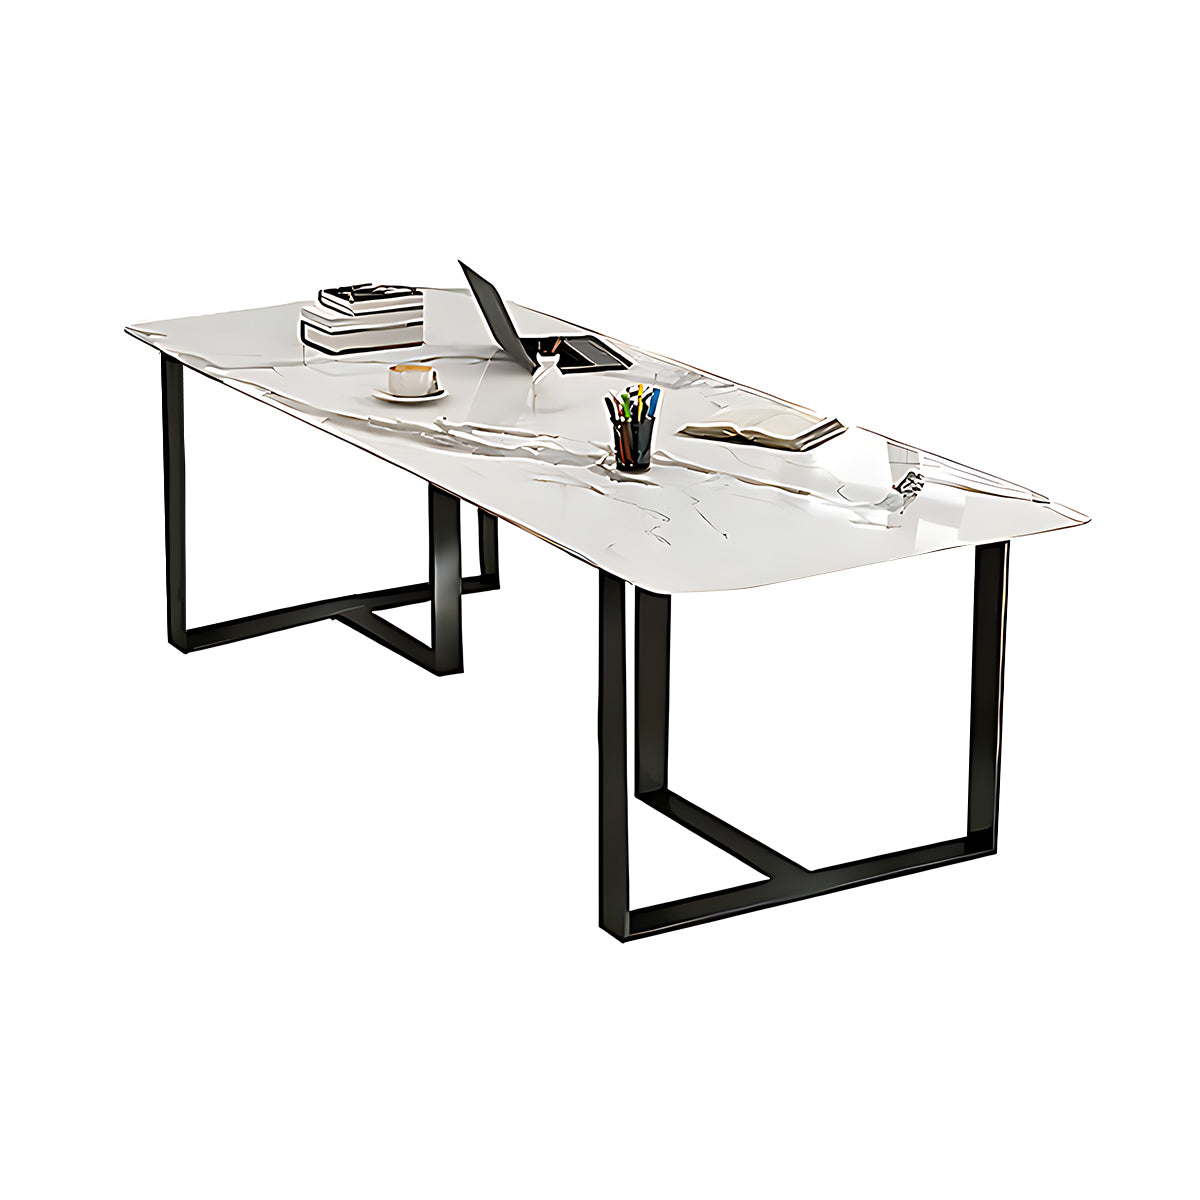 Simple Stylish Rectangular Marble Conference Table Office Desk